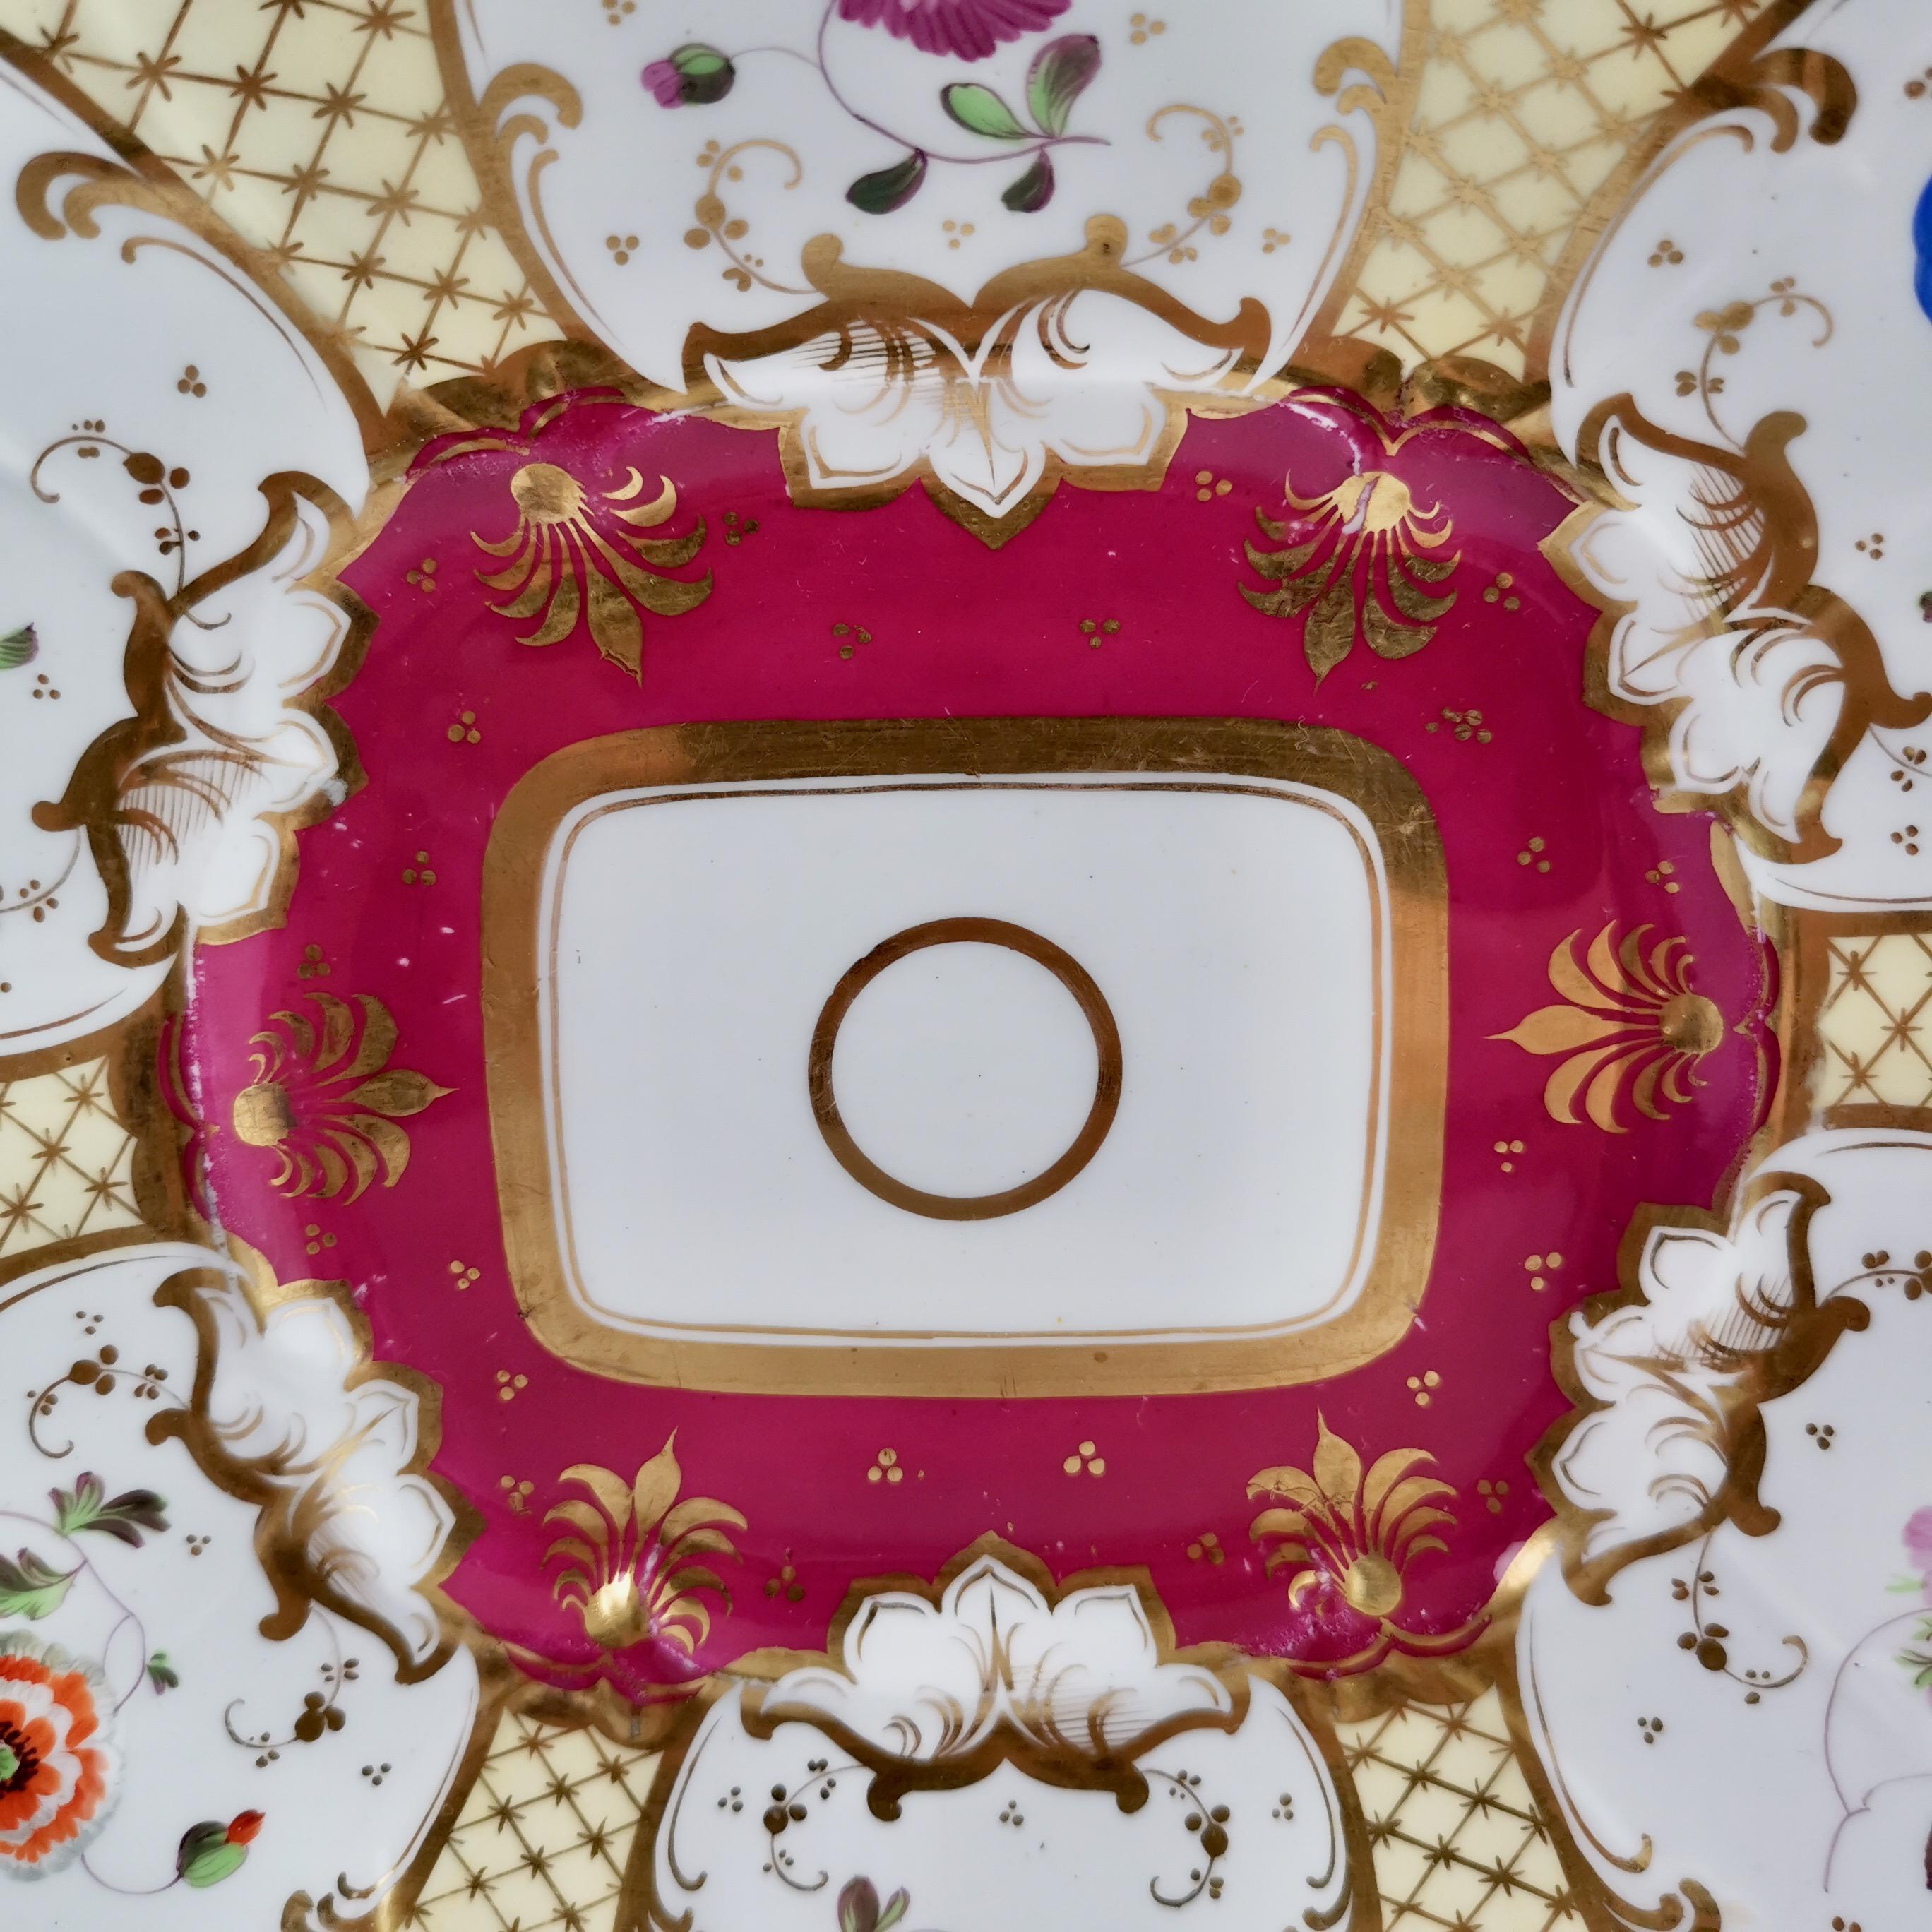 Hand-Painted Samuel Alcock Porcelain Dish, Maroon, Gilt and Flowers, Rococo Revival, ca 1835